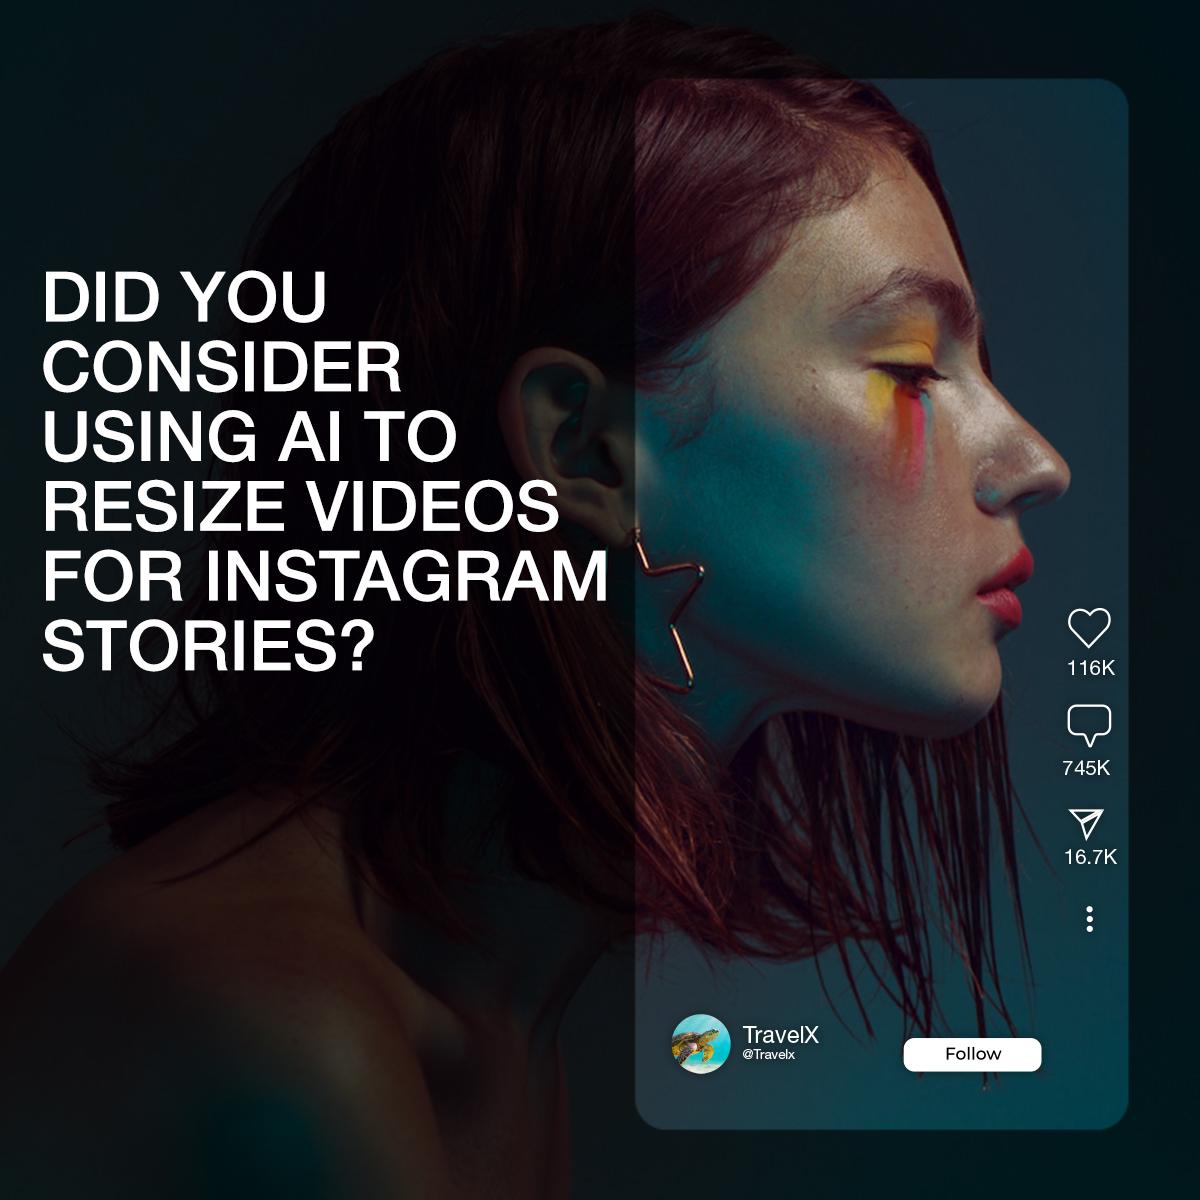 Did you consider using AI to resize videos for Instagram stories?